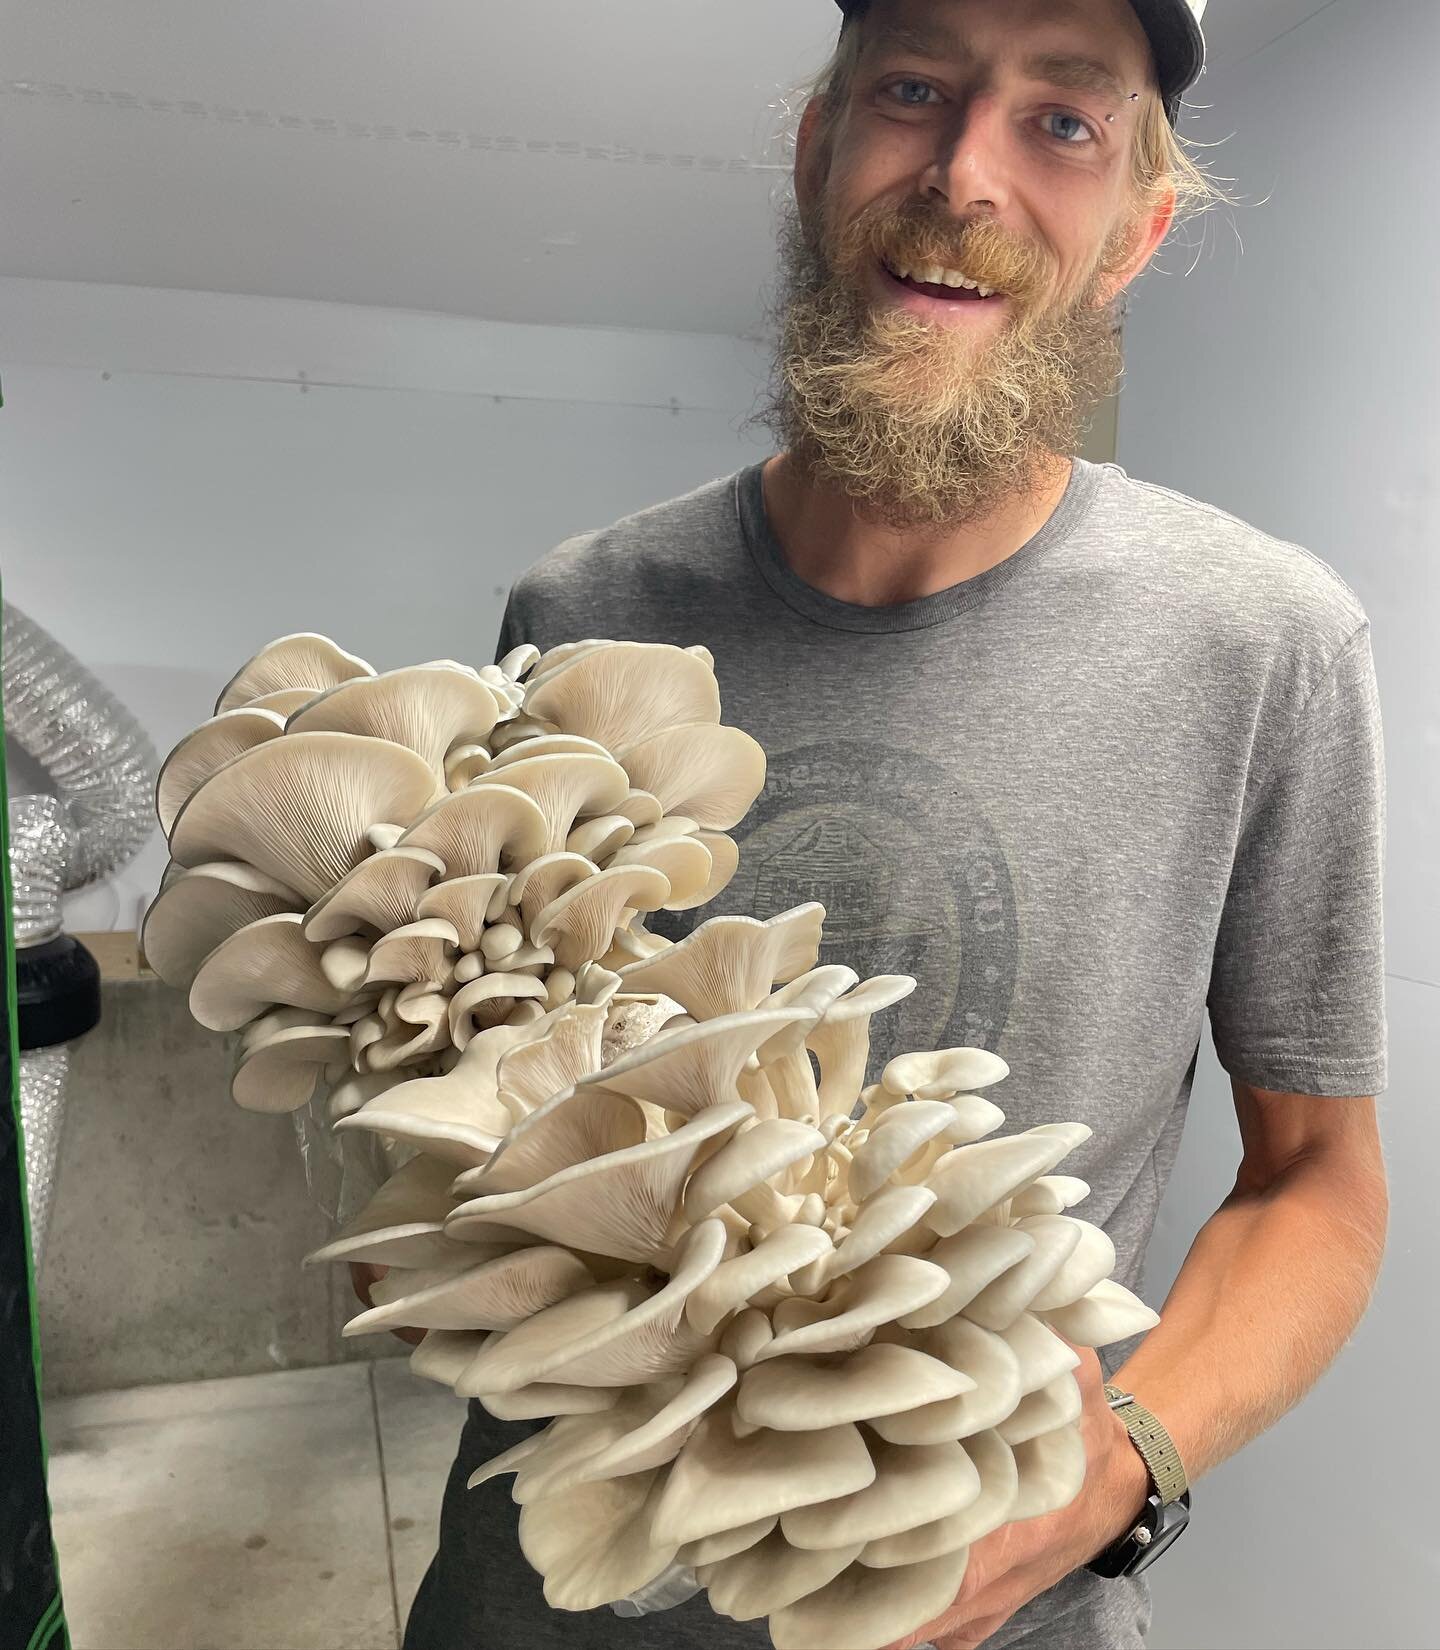 Harvesting big ole&rsquo; blue oyster clusters to pack up for our Durango delivery day tomorrow! 

#colorado #mushrooms #durangocolorado #coloradomushrooms #smallfarm #mycology #oystermushrooms